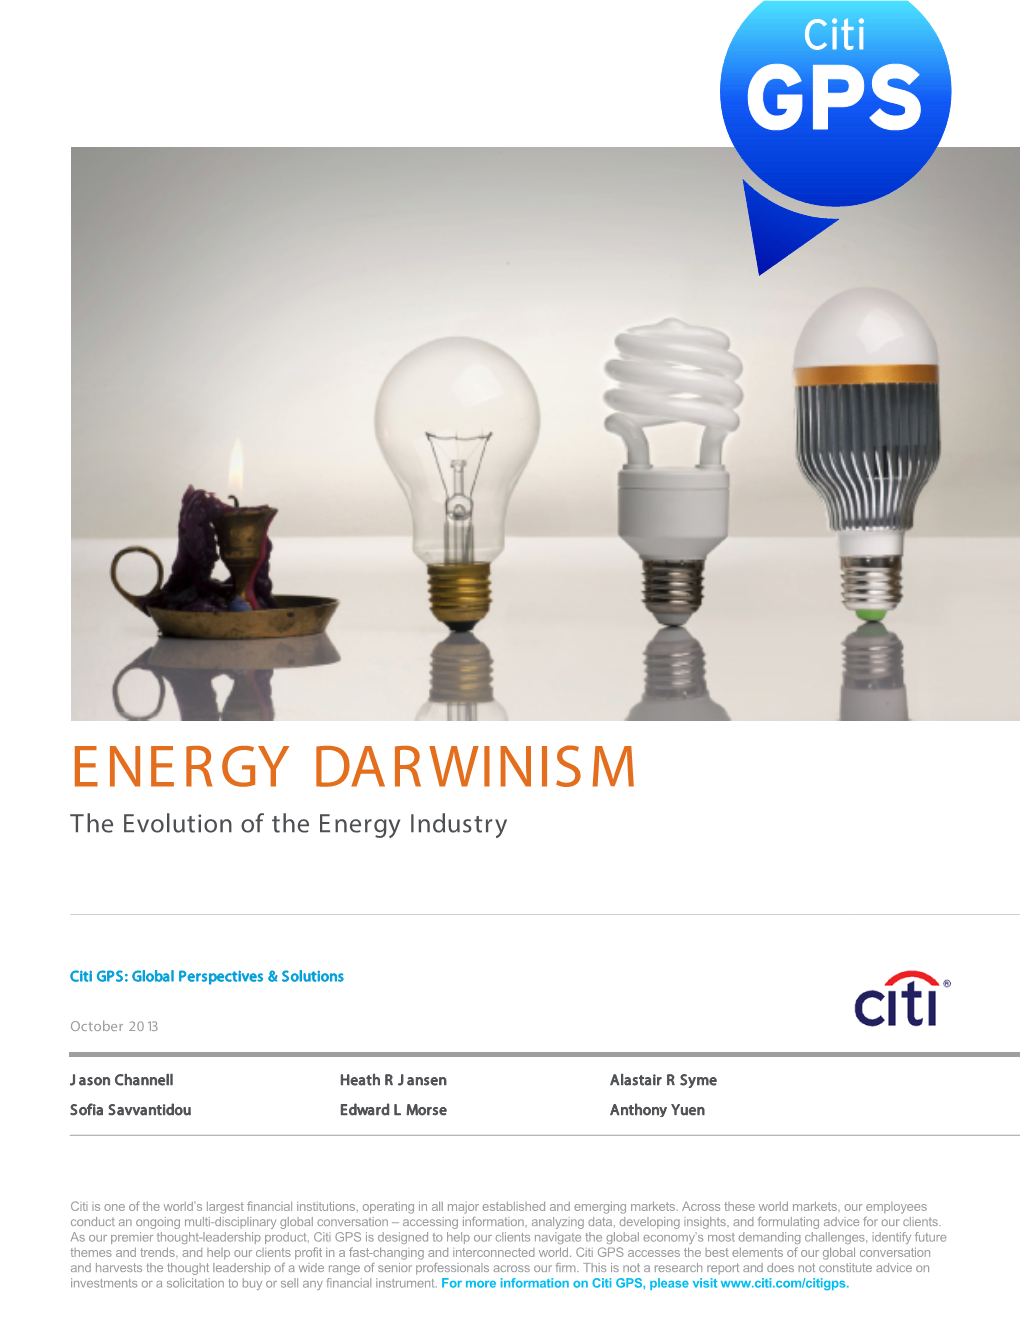 ENERGY DARWINISM the Evolution of the Energy Industry